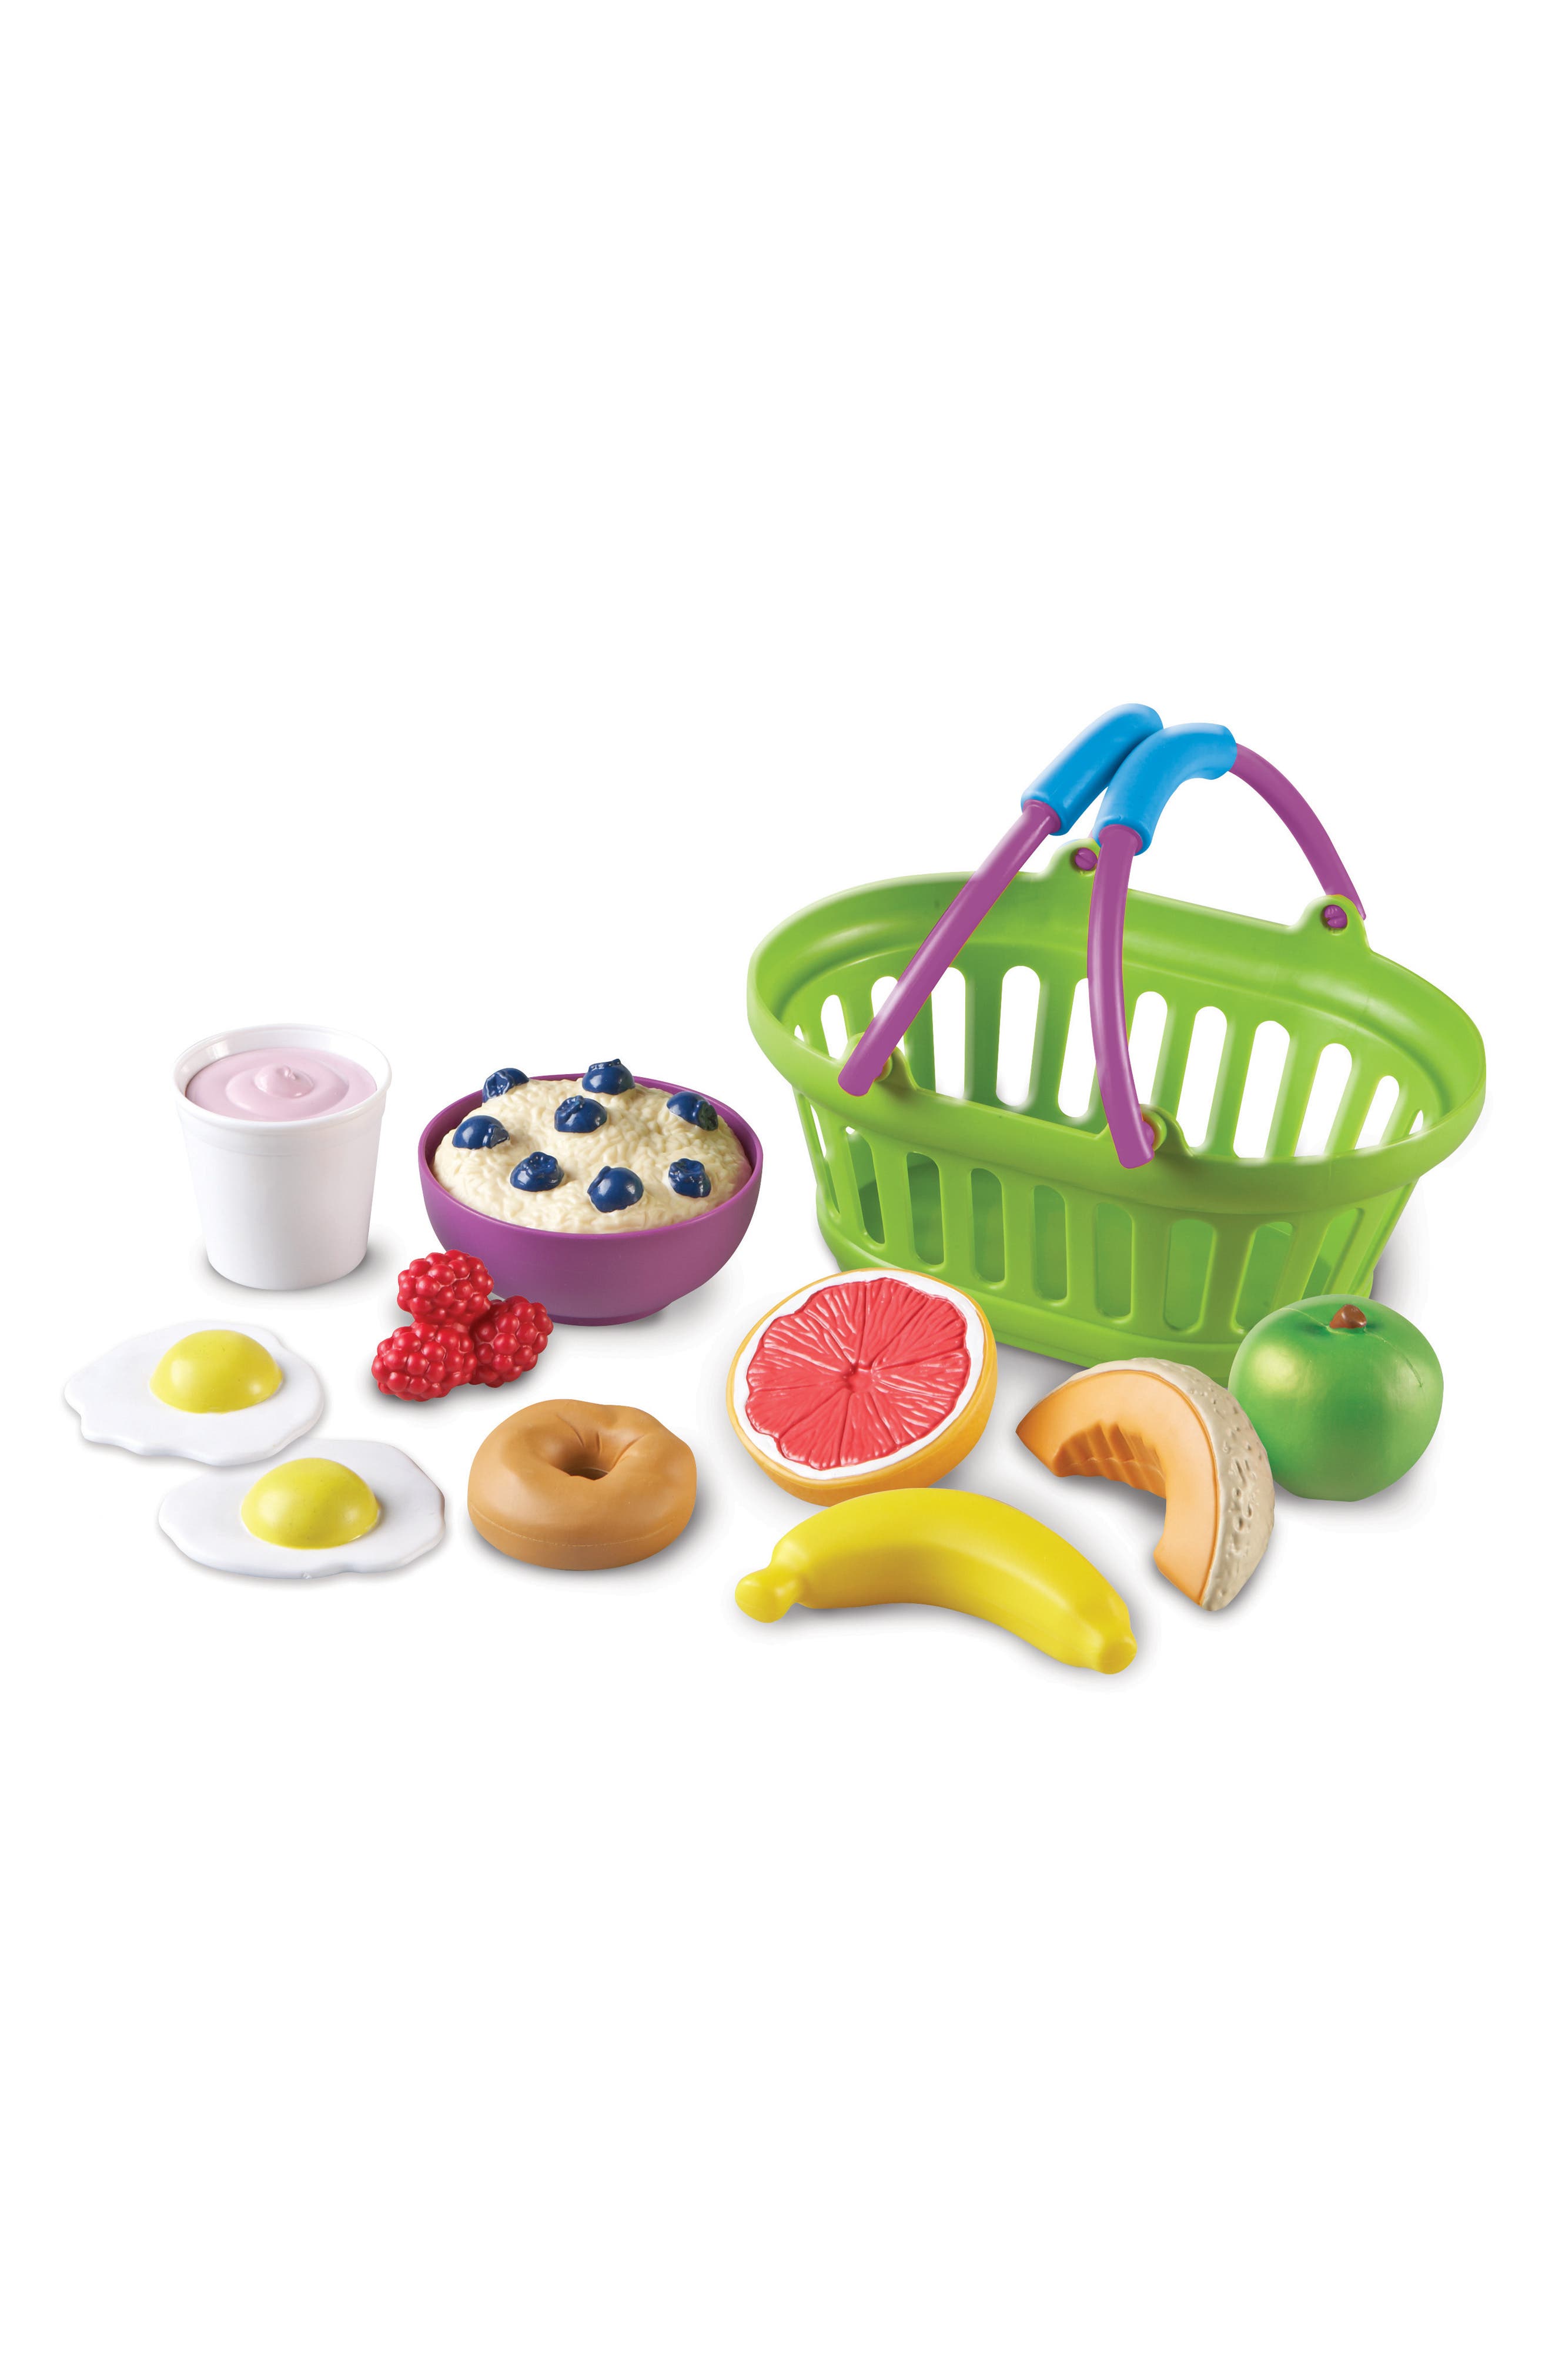 UPC 765023097405 product image for Learning Resources New Sprouts Healthy Breakfast Play Set | upcitemdb.com